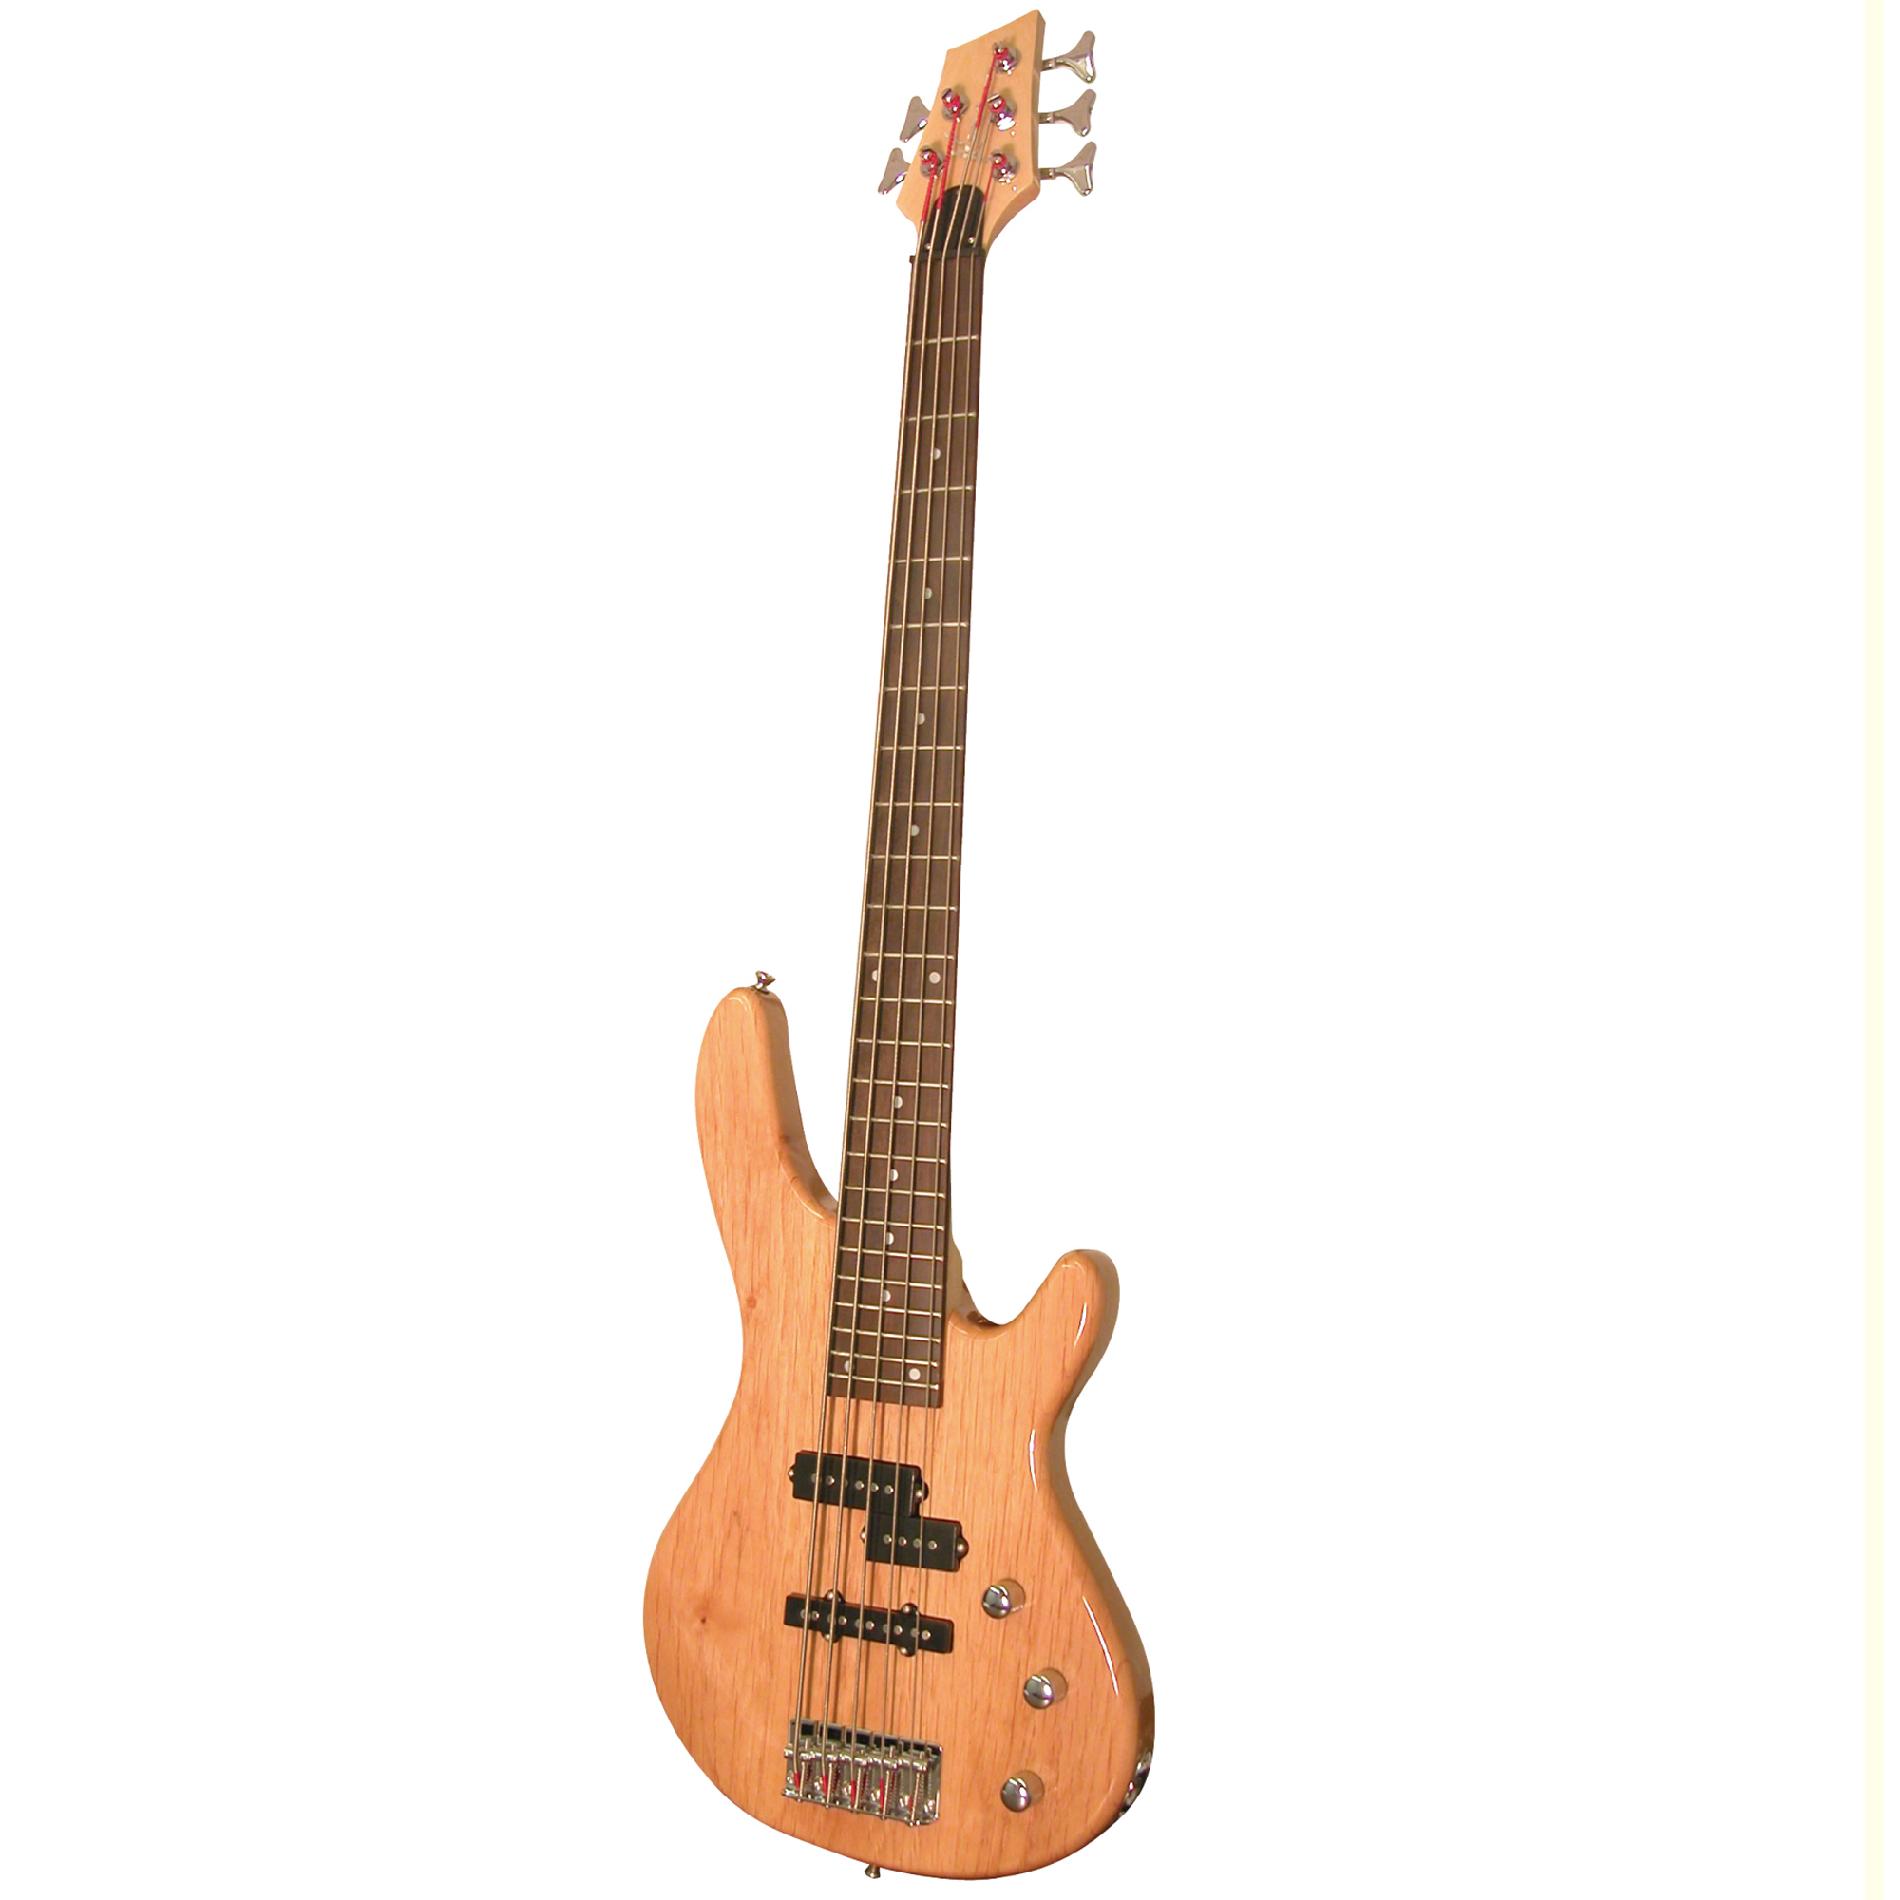 Kona 5 String Electric Bass in Natural Wood Finish